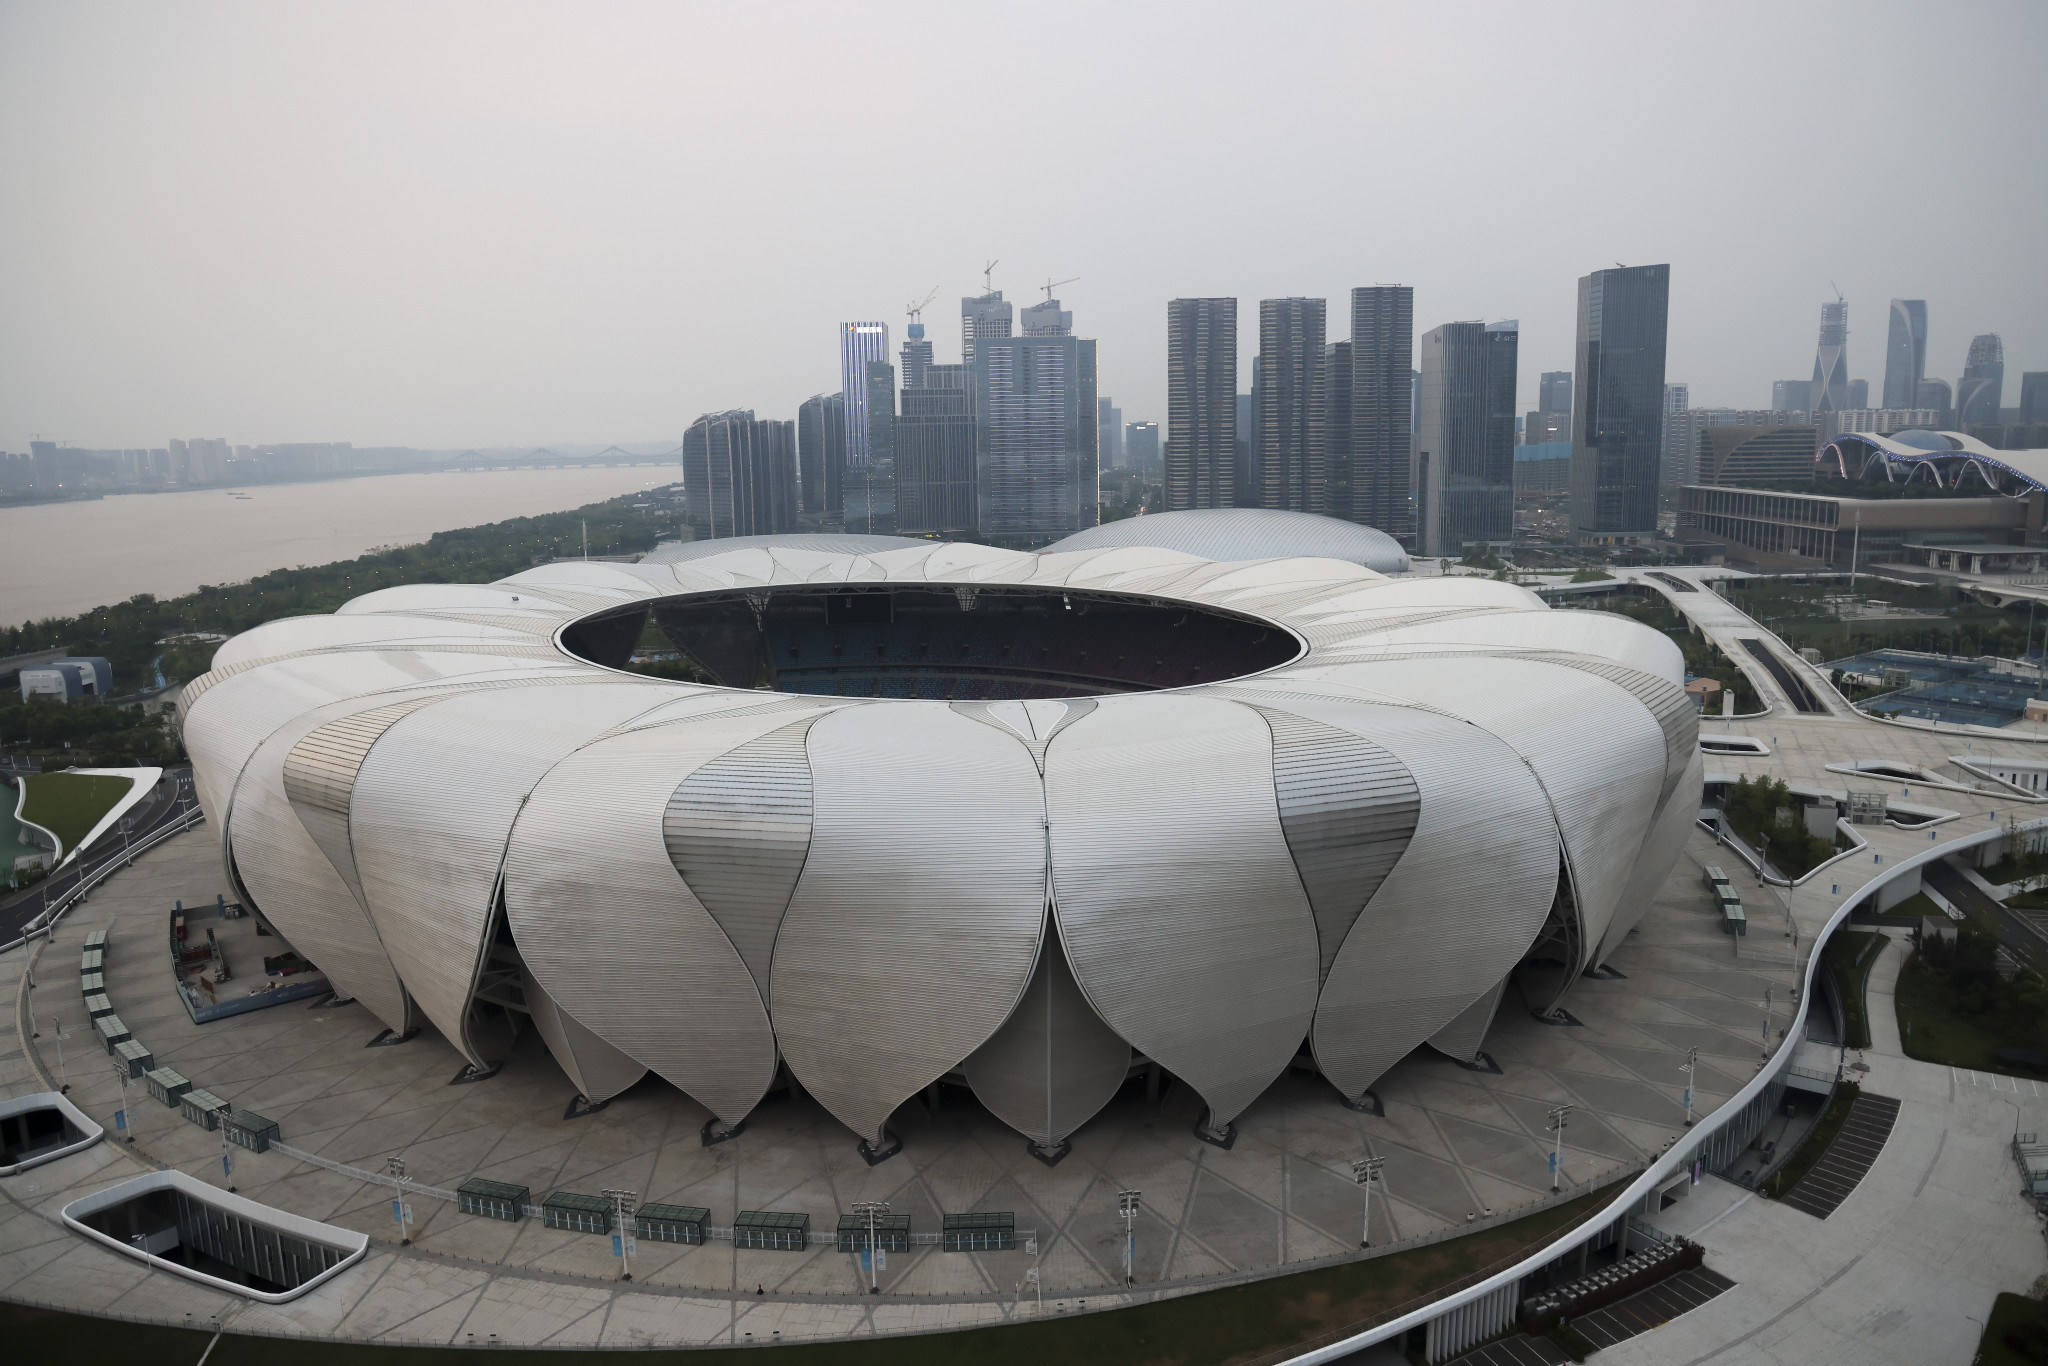 Hangzhou is set to host the 2022 Asian Games this year after it was postponed due to the COVID-19 pandemic ©Getty Images